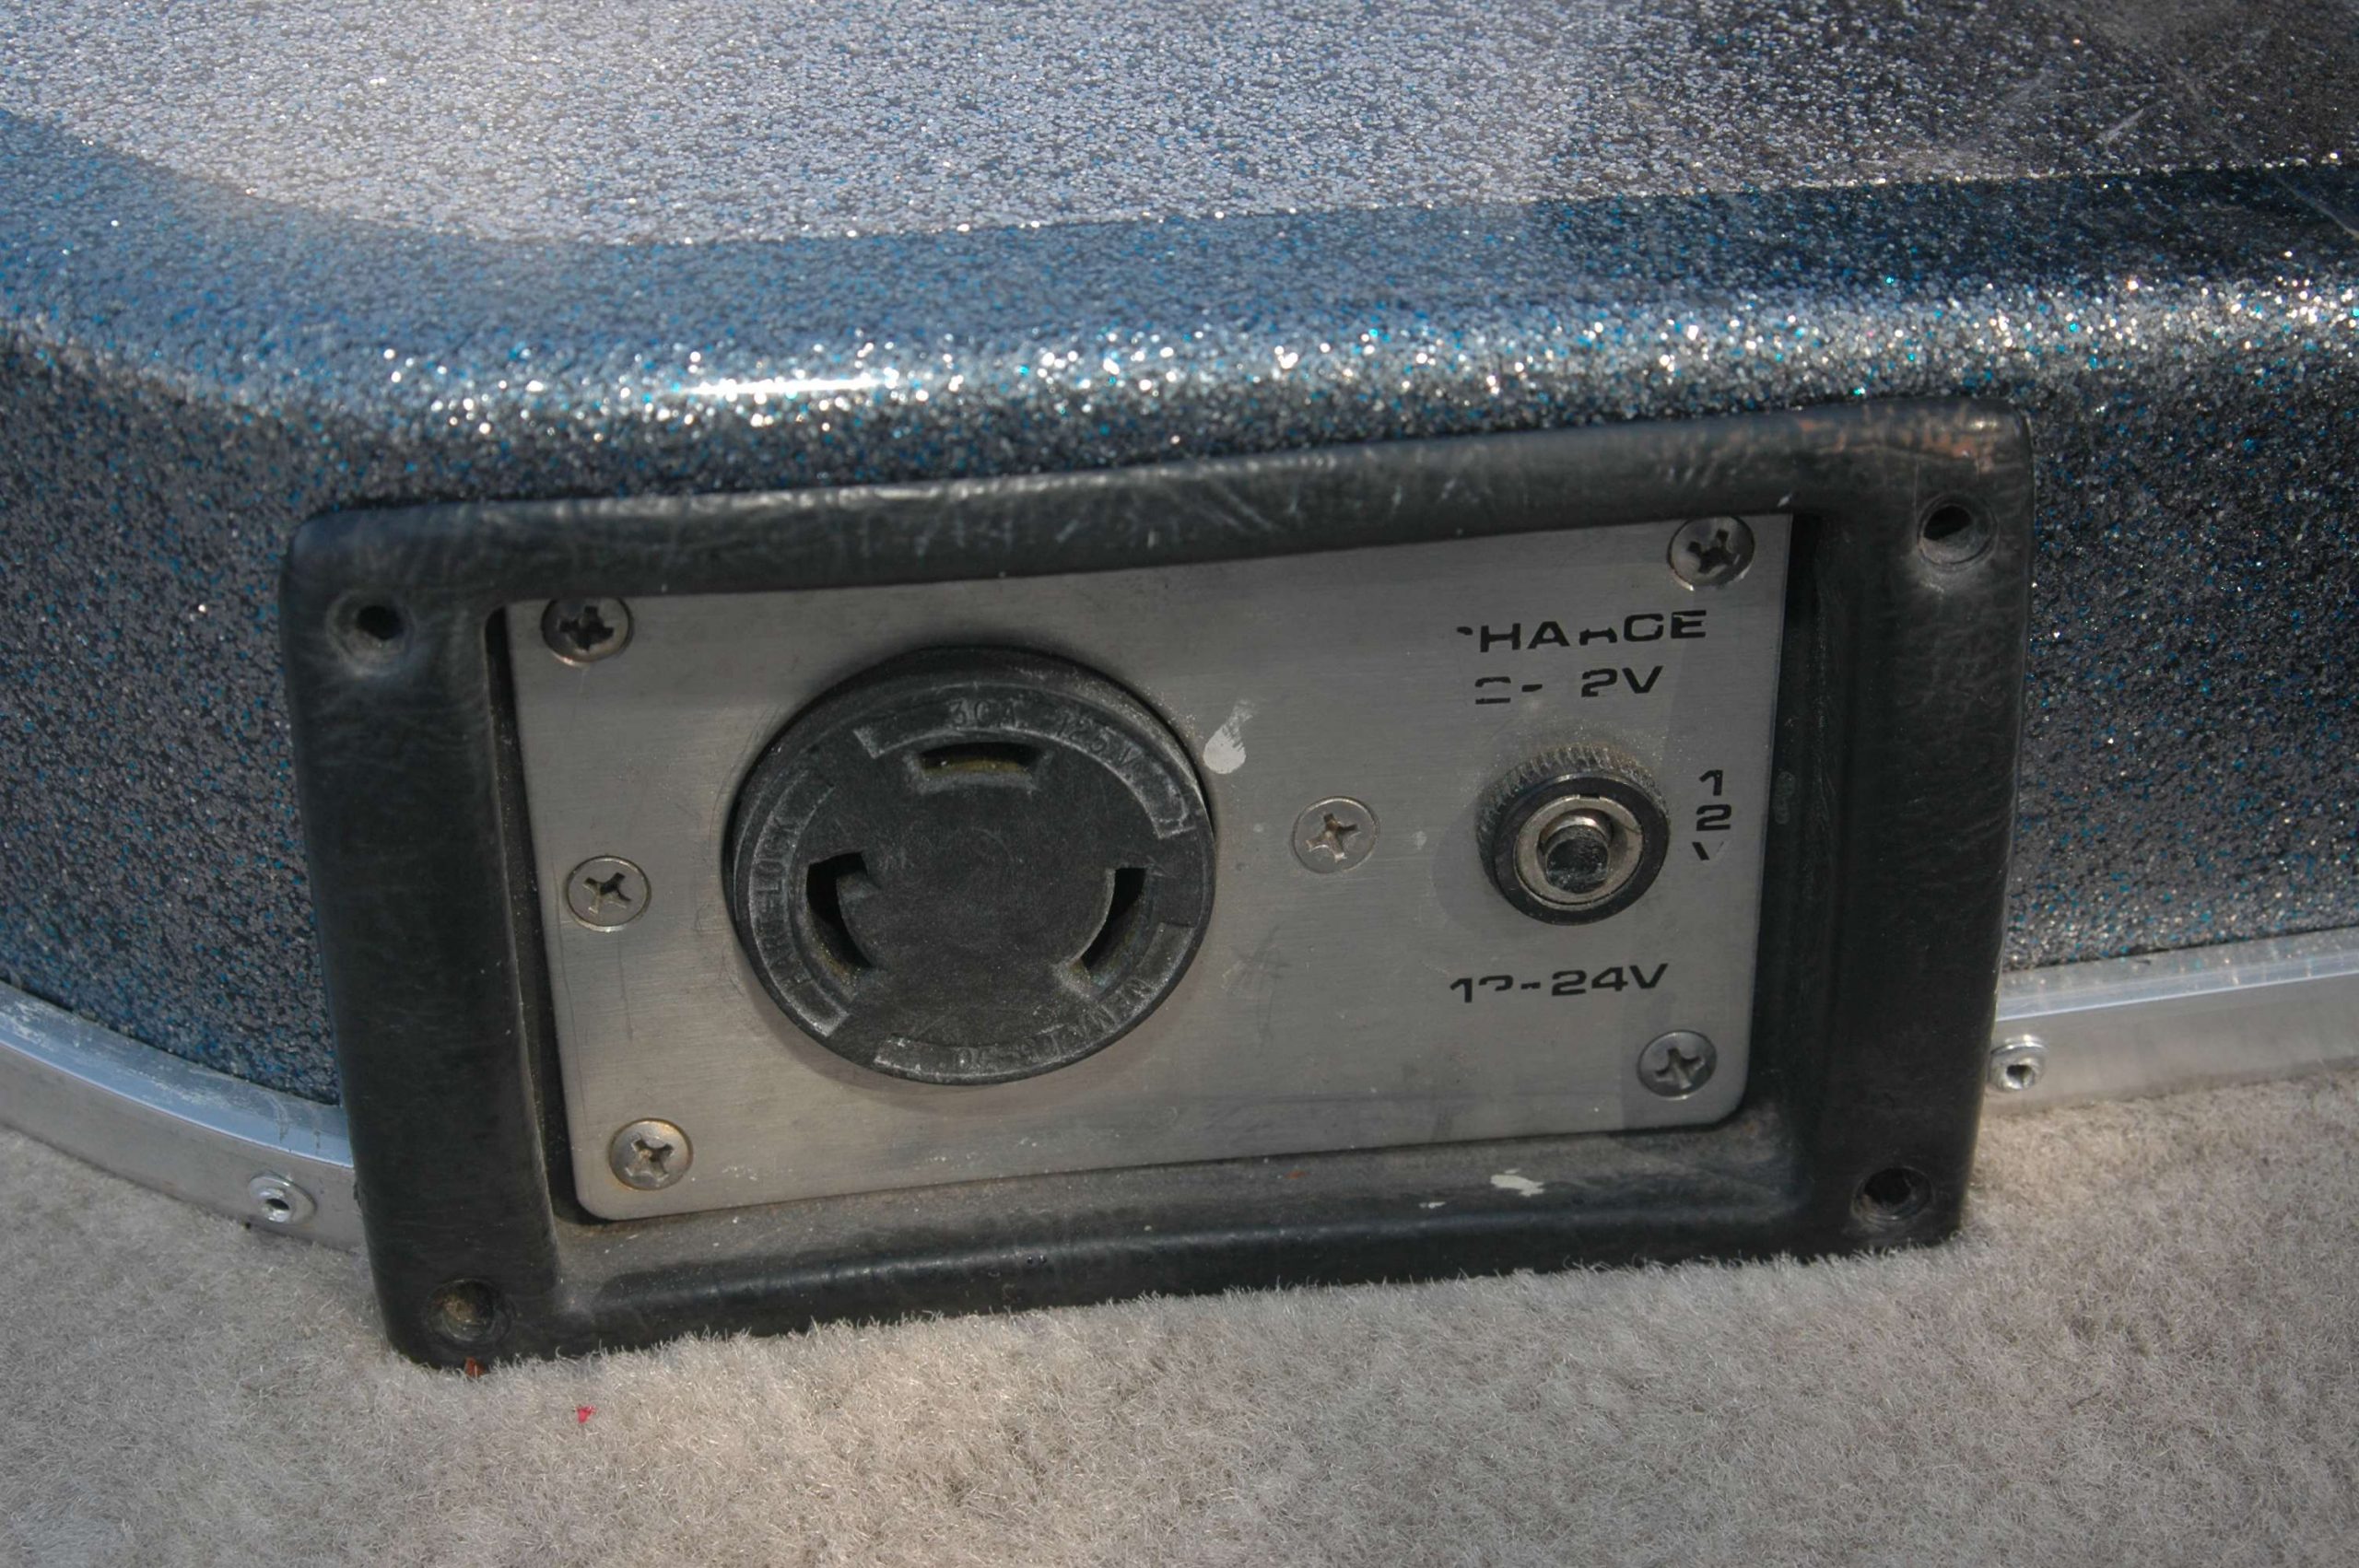 To accomodate 12- and 24-volt motors, the boat had two sets of 6-gauge wires attached to the outlet.